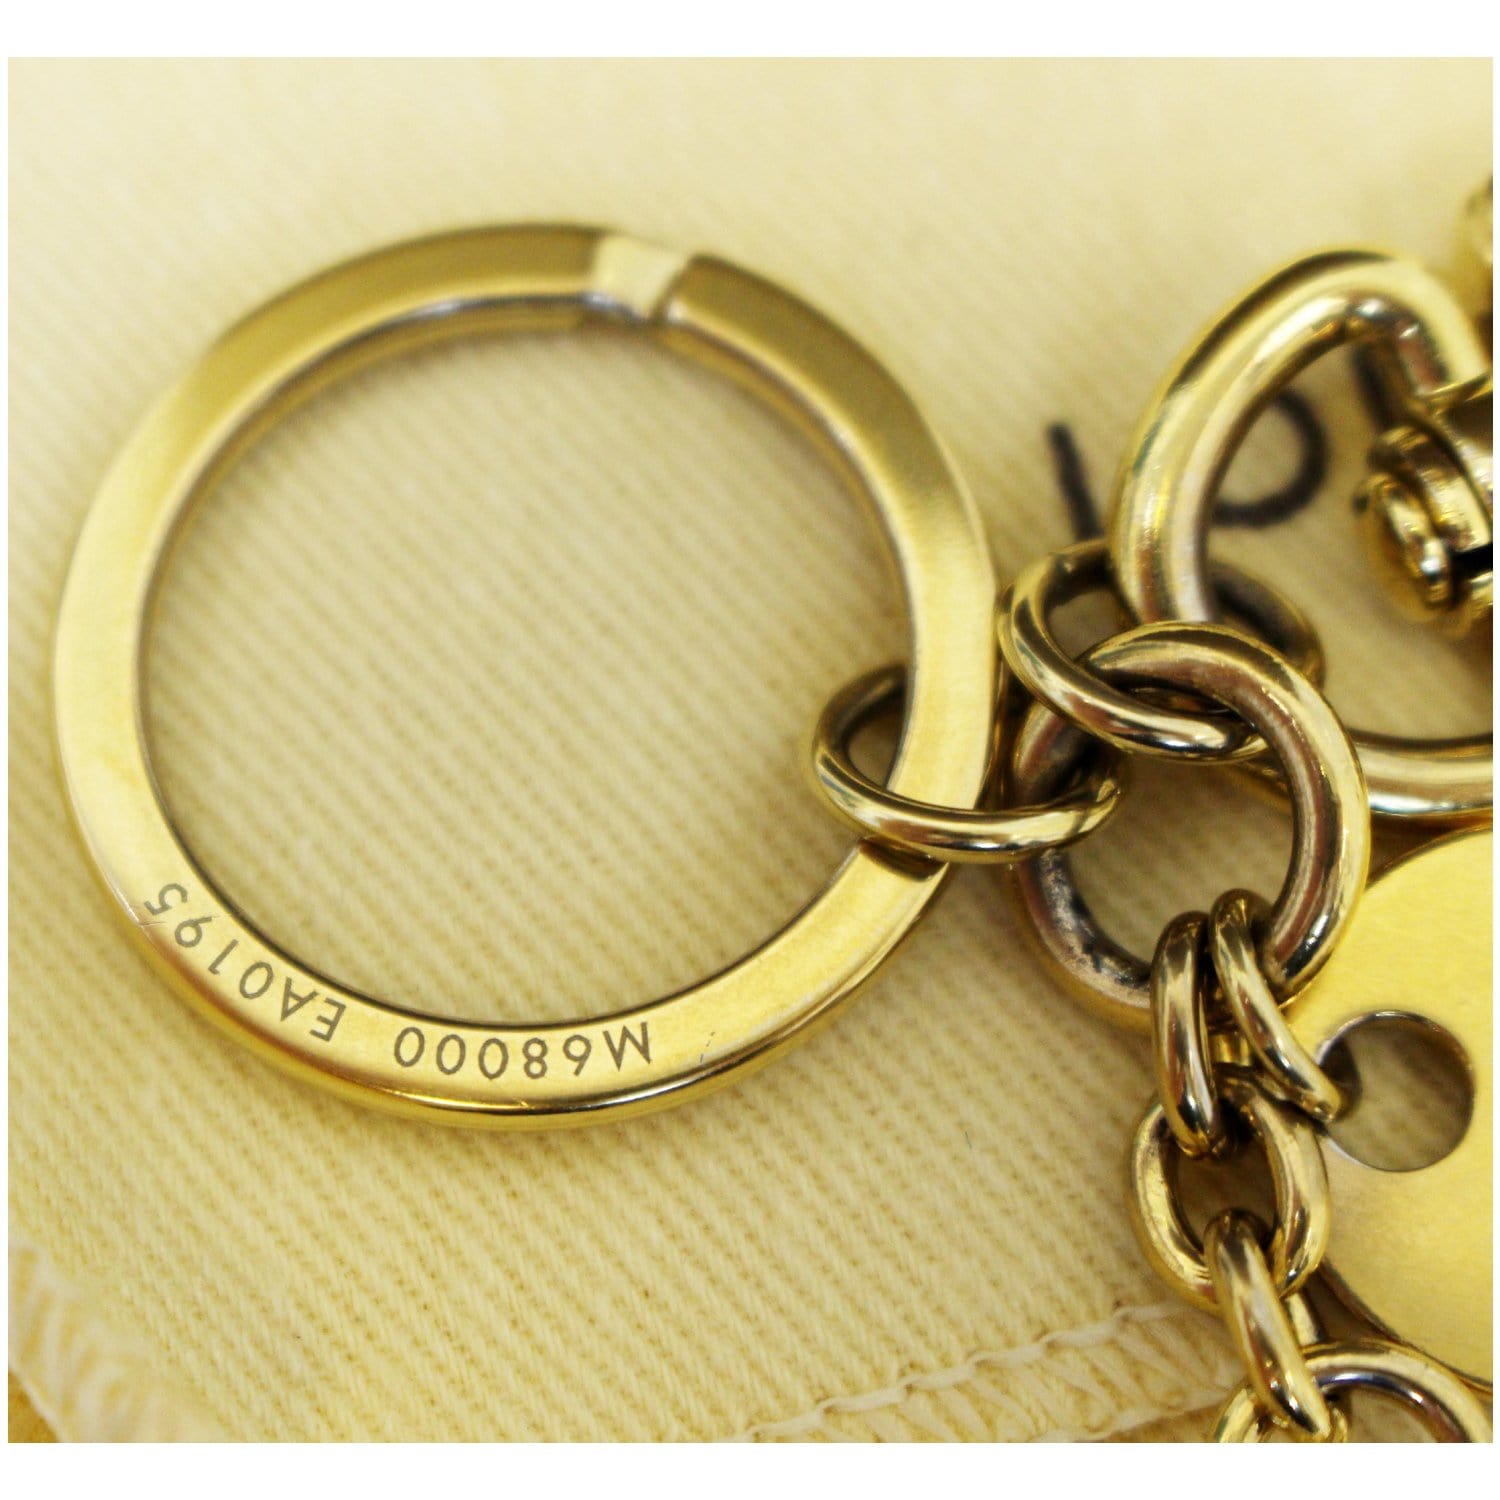 Louis Vuitton Bag charm key ring LV Circle gold good condition Authentic